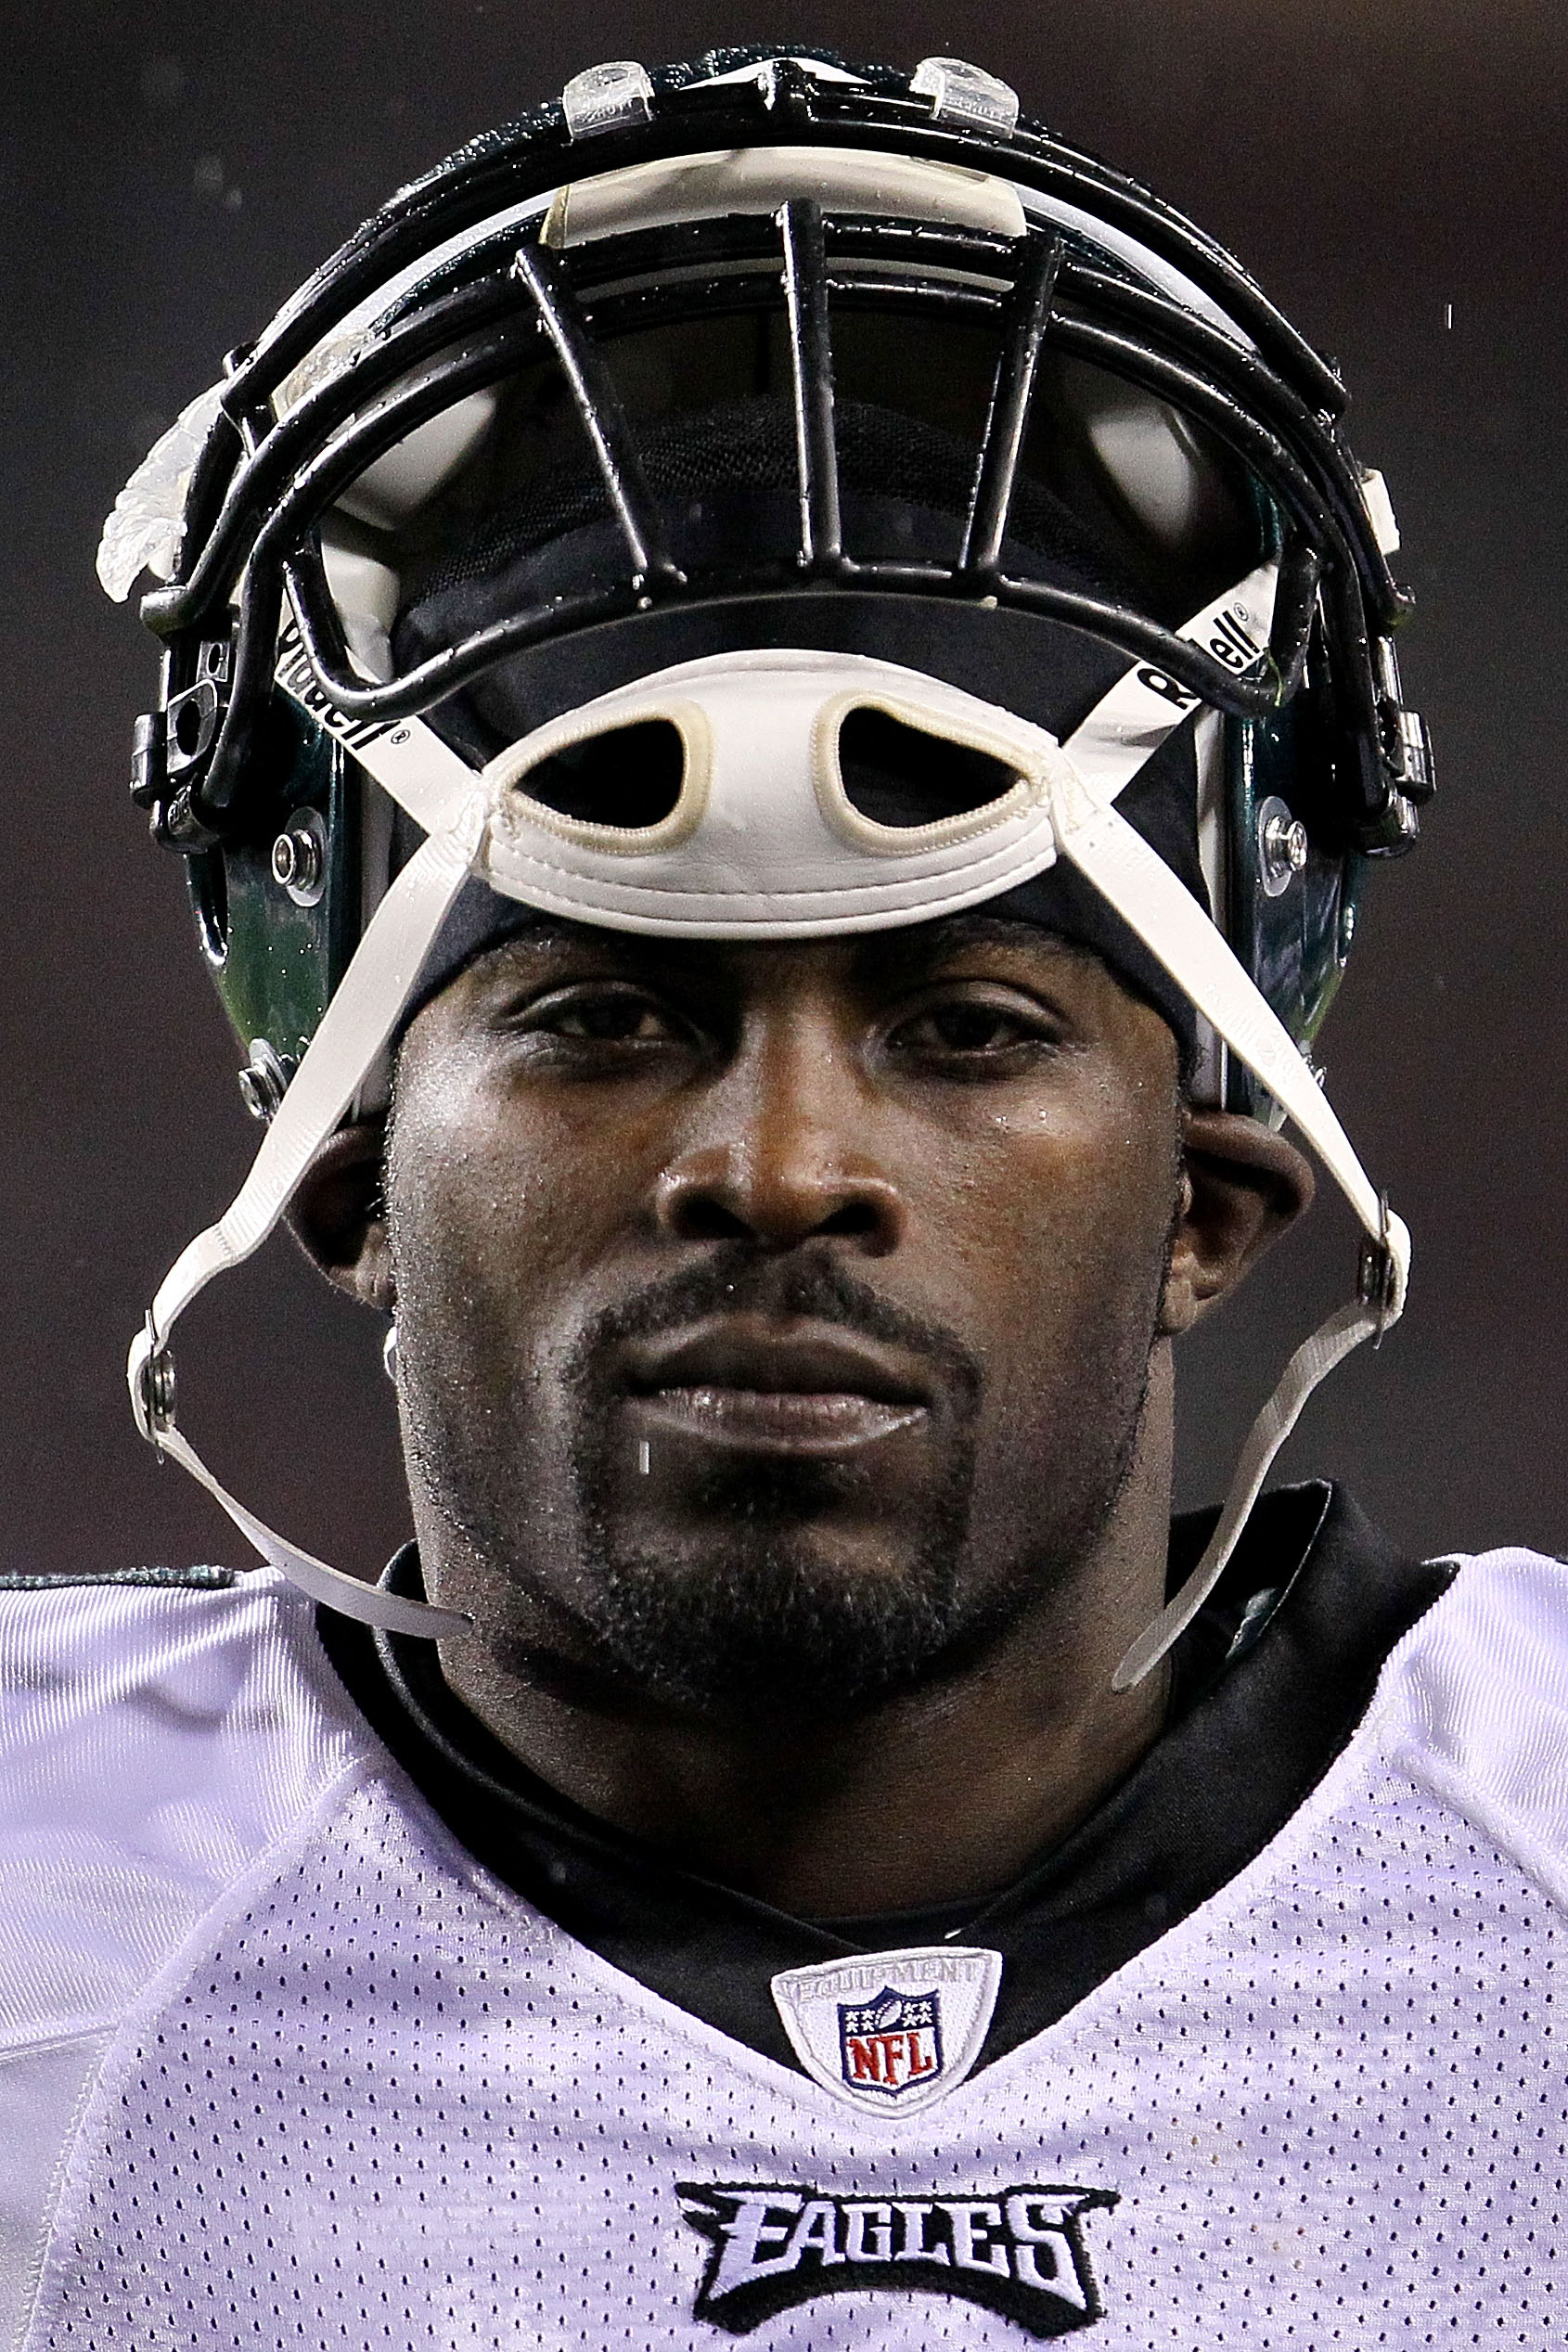 LANDOVER, MD - NOVEMBER 15:  Michael Vick #7 of the Philadelphia Eagles looks on while waiting for a review to be completed against  the Washington Redskins on November 15, 2010 at FedExField in Landover, Maryland.  (Photo by Chris McGrath/Getty Images)